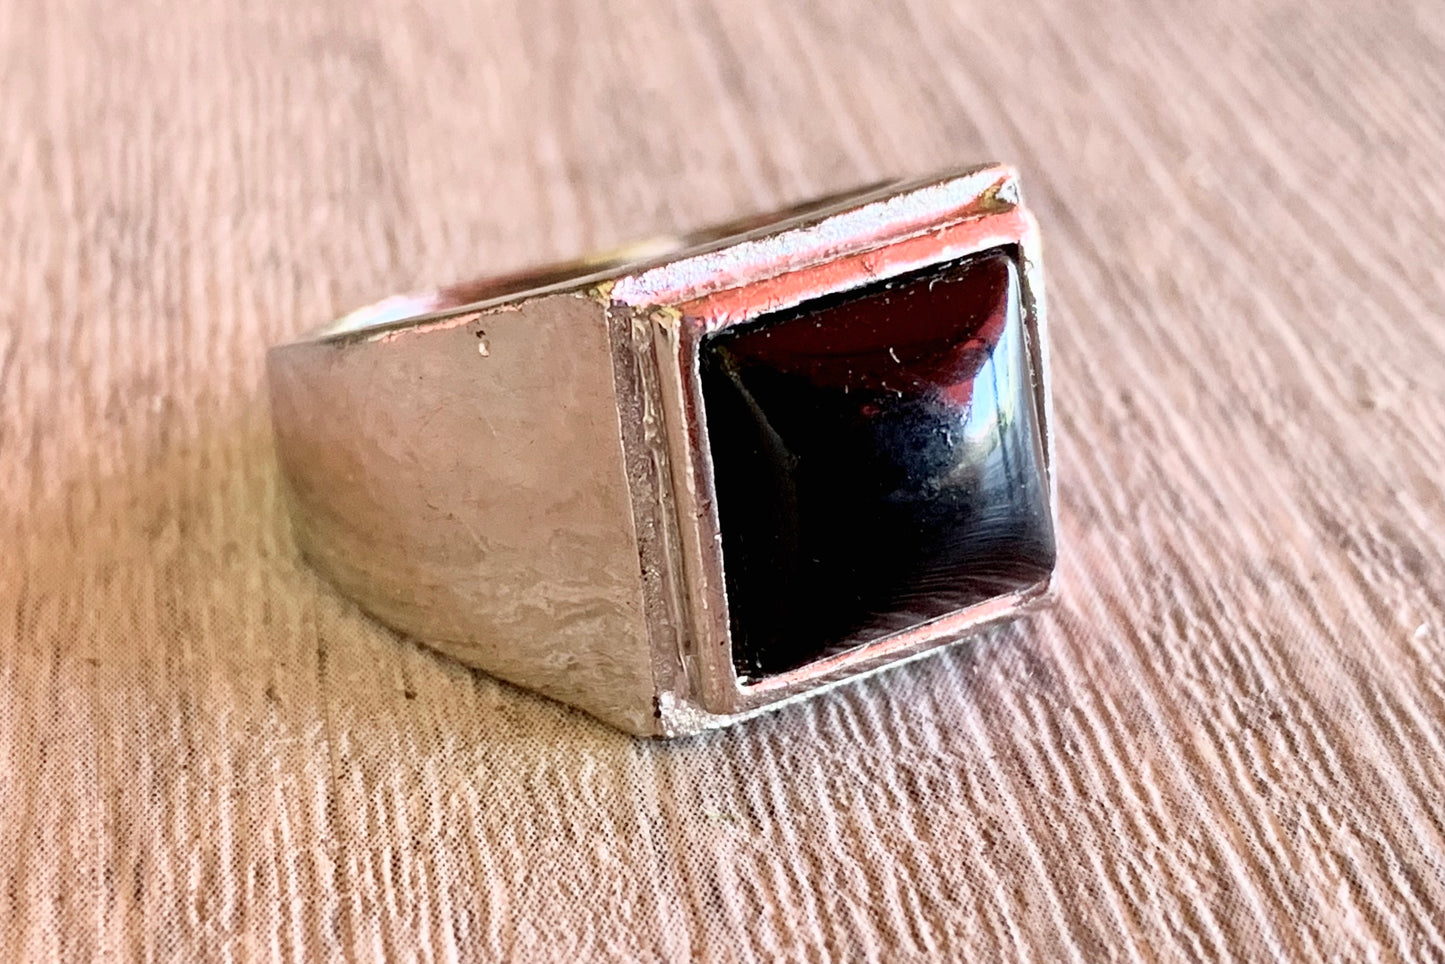 Vintage Stainless Steel and Black Stone (Pre-Owned) Square Men's Ring Size 9